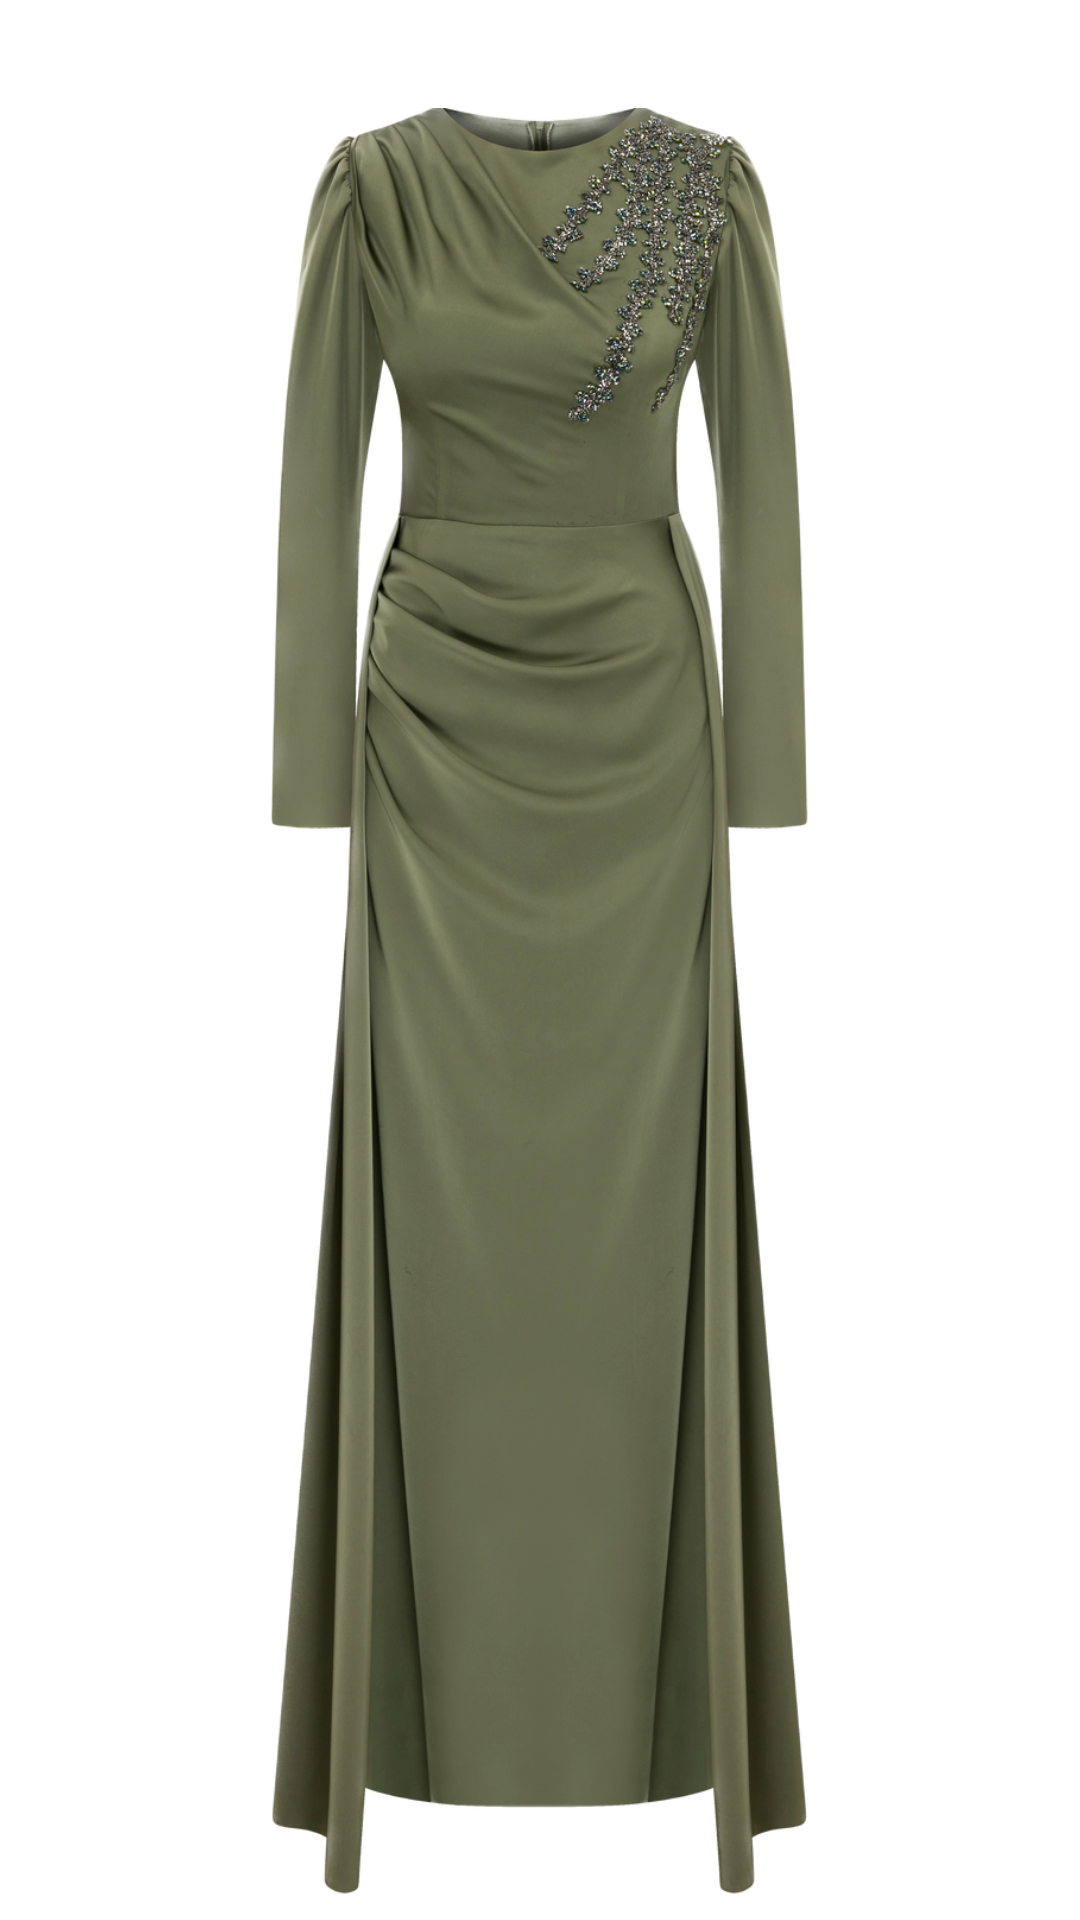 Satin Cape Elegance: Modest Full Mold Dress with Extended Tail and Dual Cape Detail